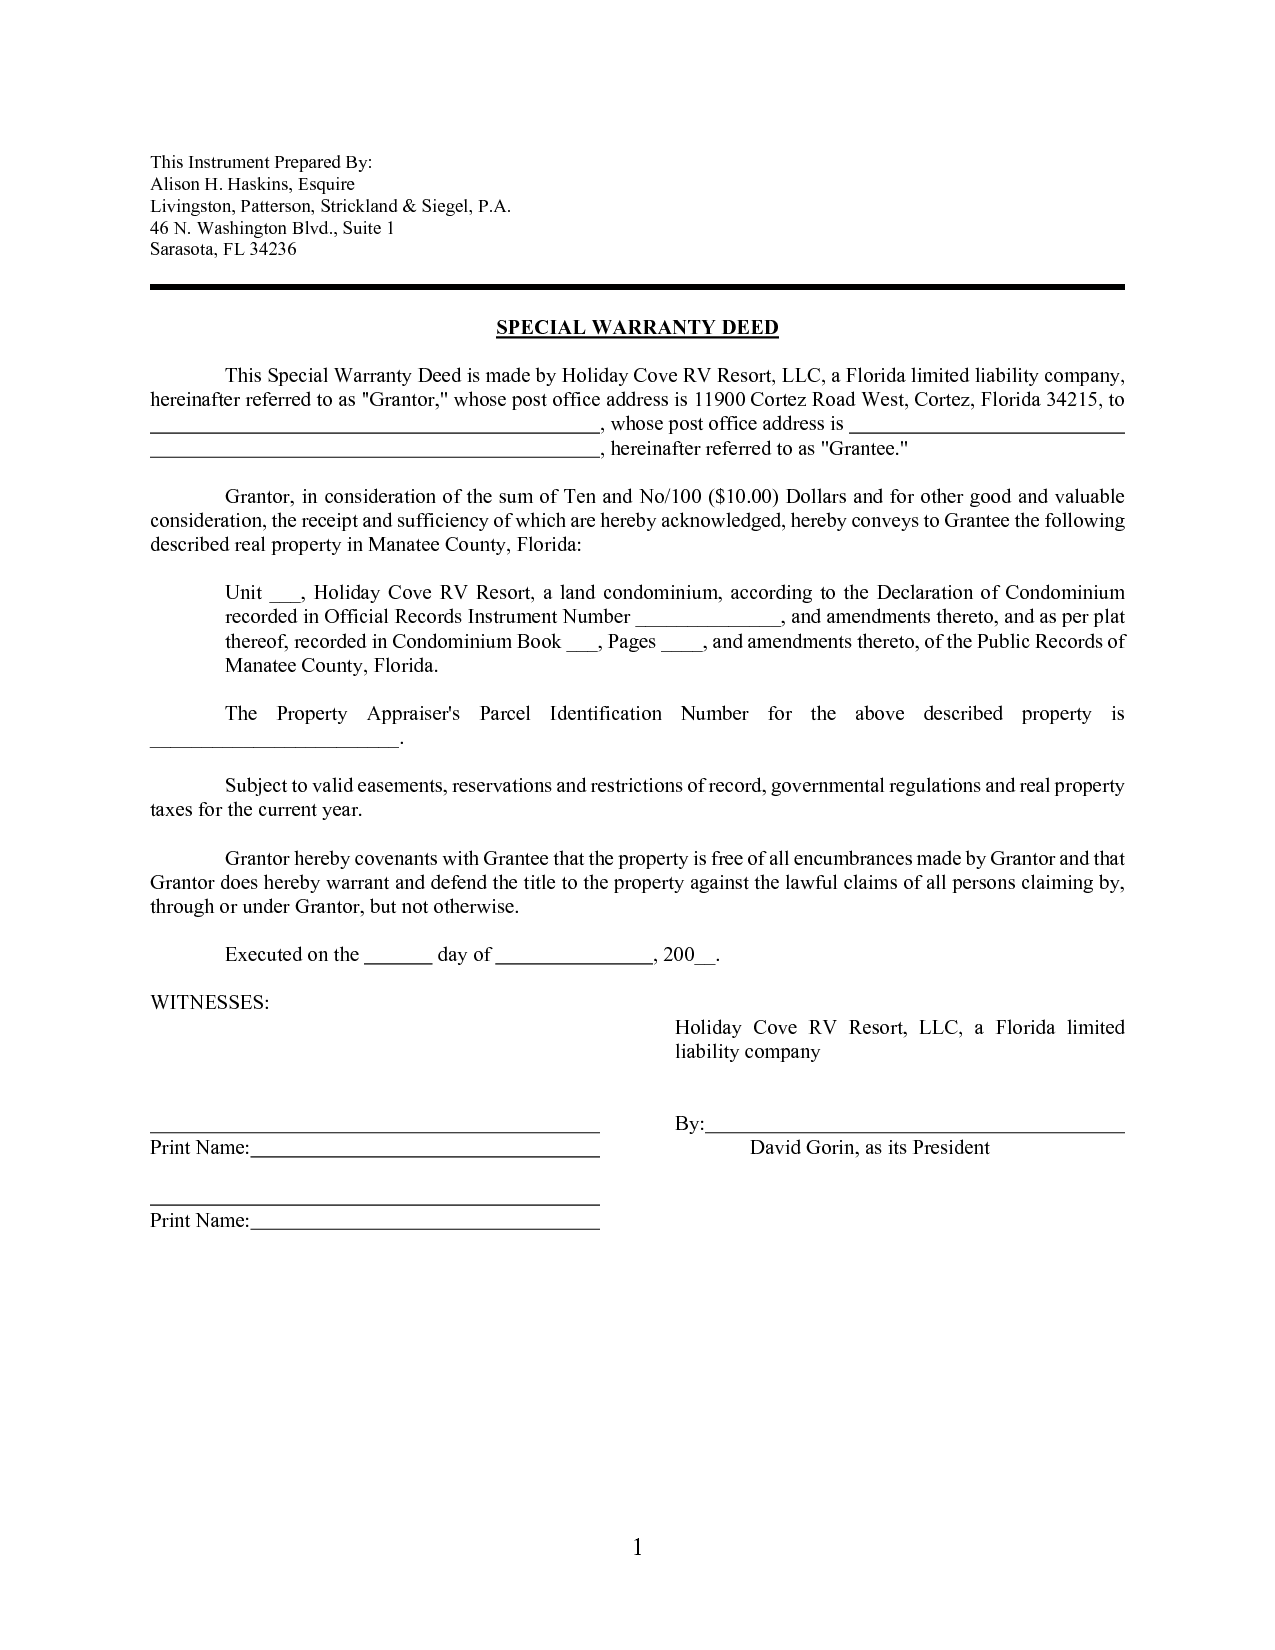 special-warranty-deed-example-free-printable-documents